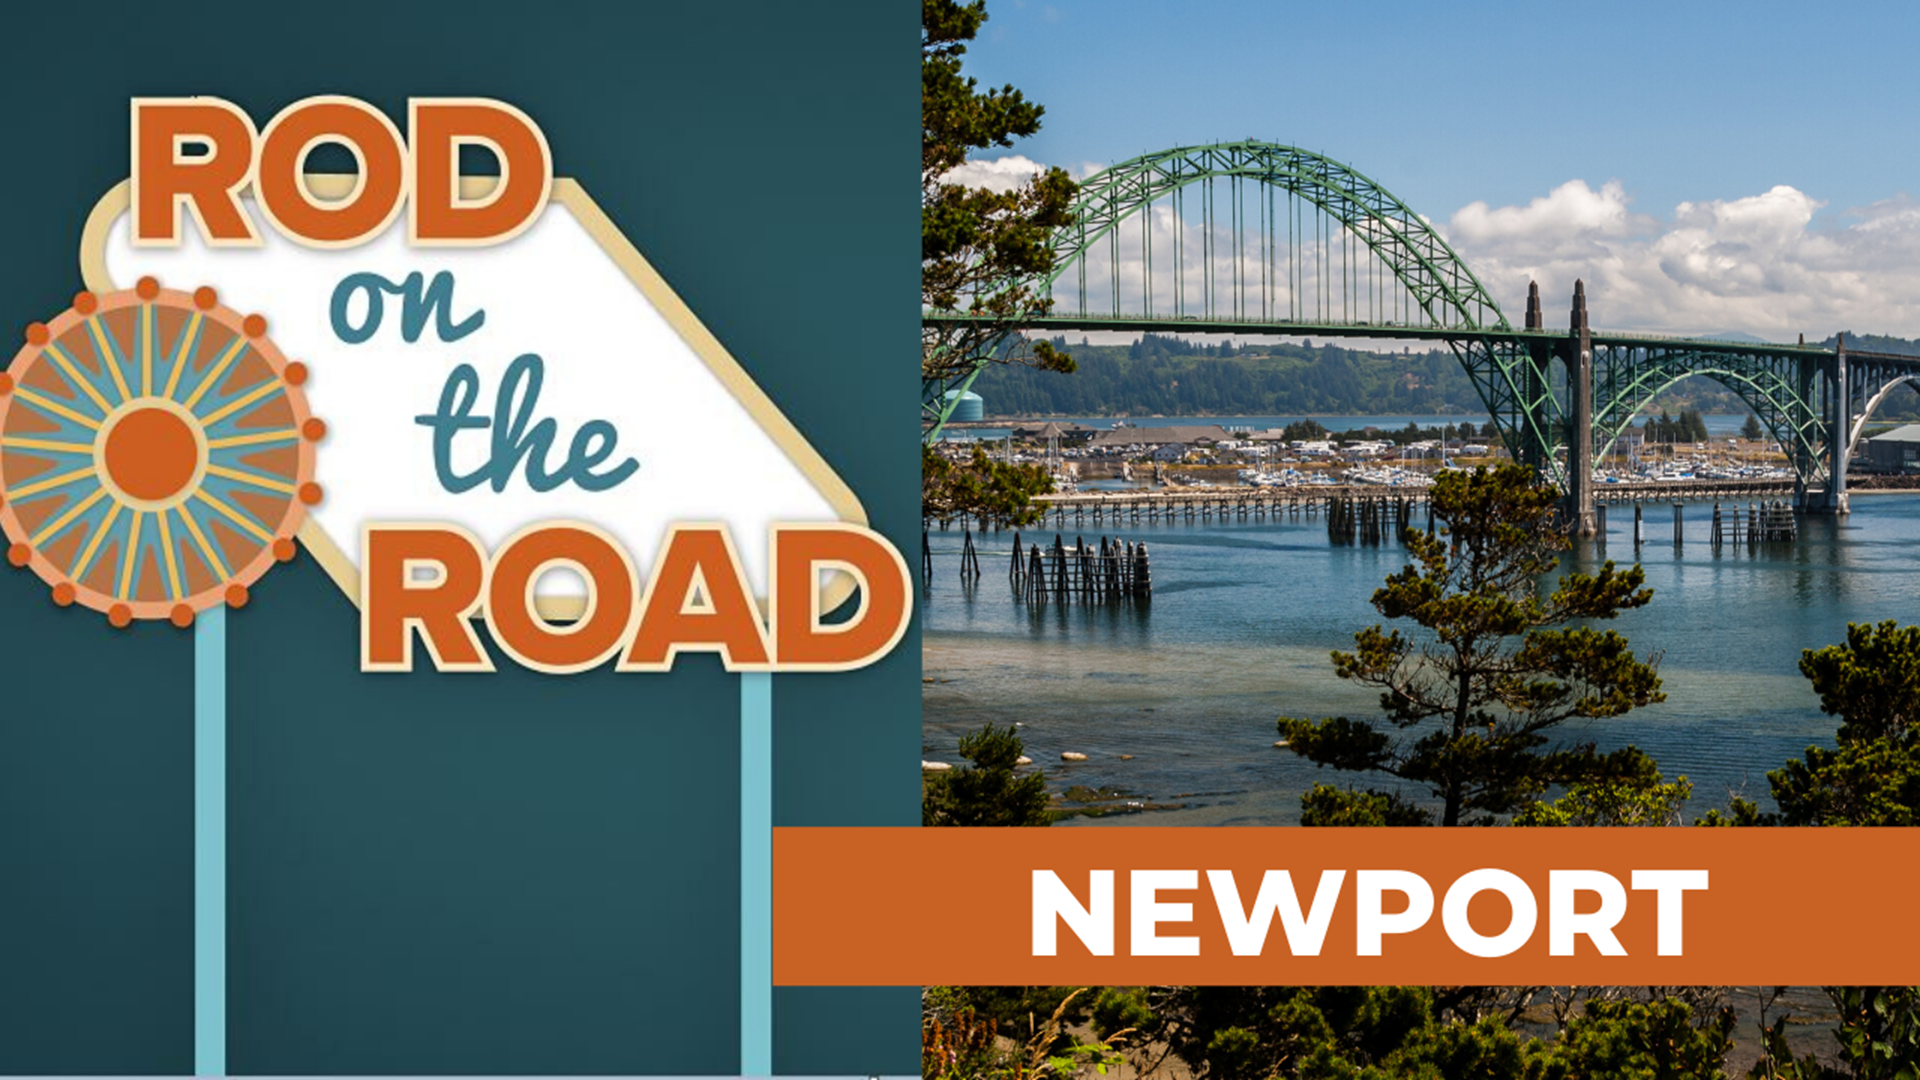 Meteorologist Rod Hill is back highlighting your communities, but now he's visiting virtually. This week, a trip to Newport on the central Oregon coast.